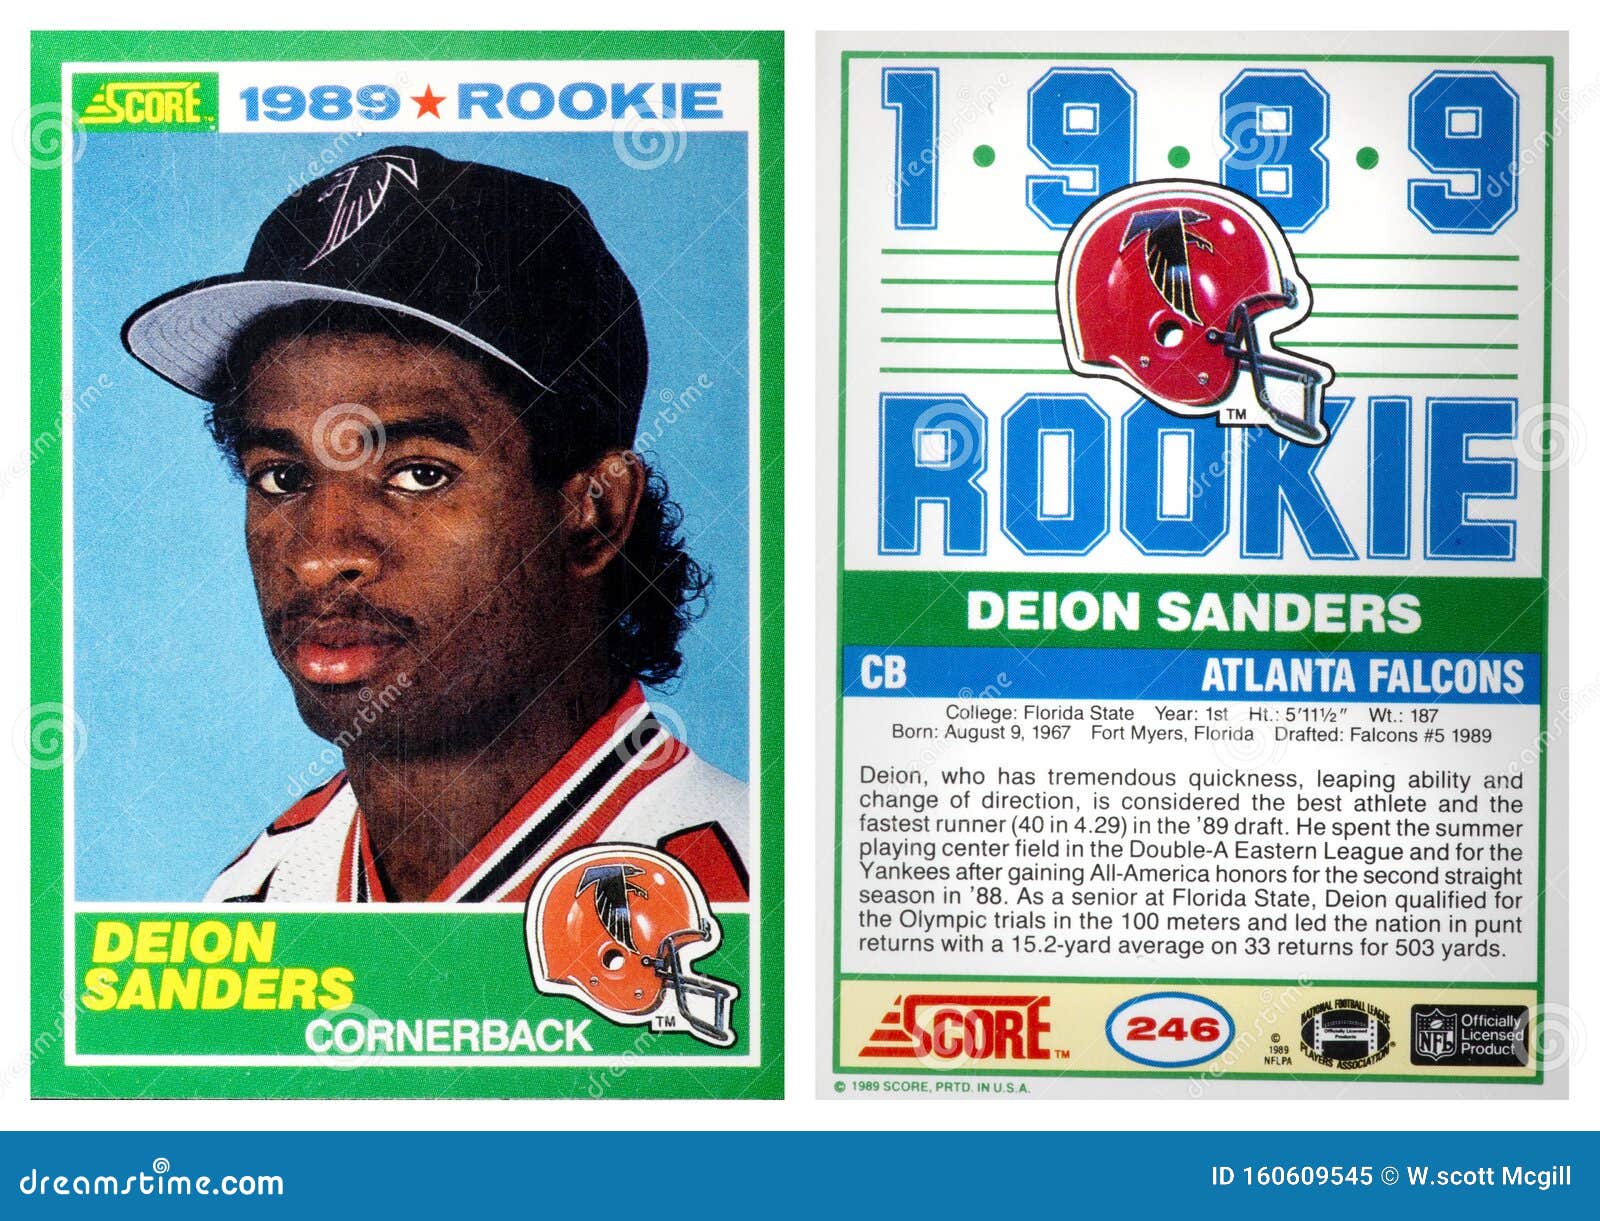 Deion Sanders Rookie Card from Score Card Editorial Image - Image of